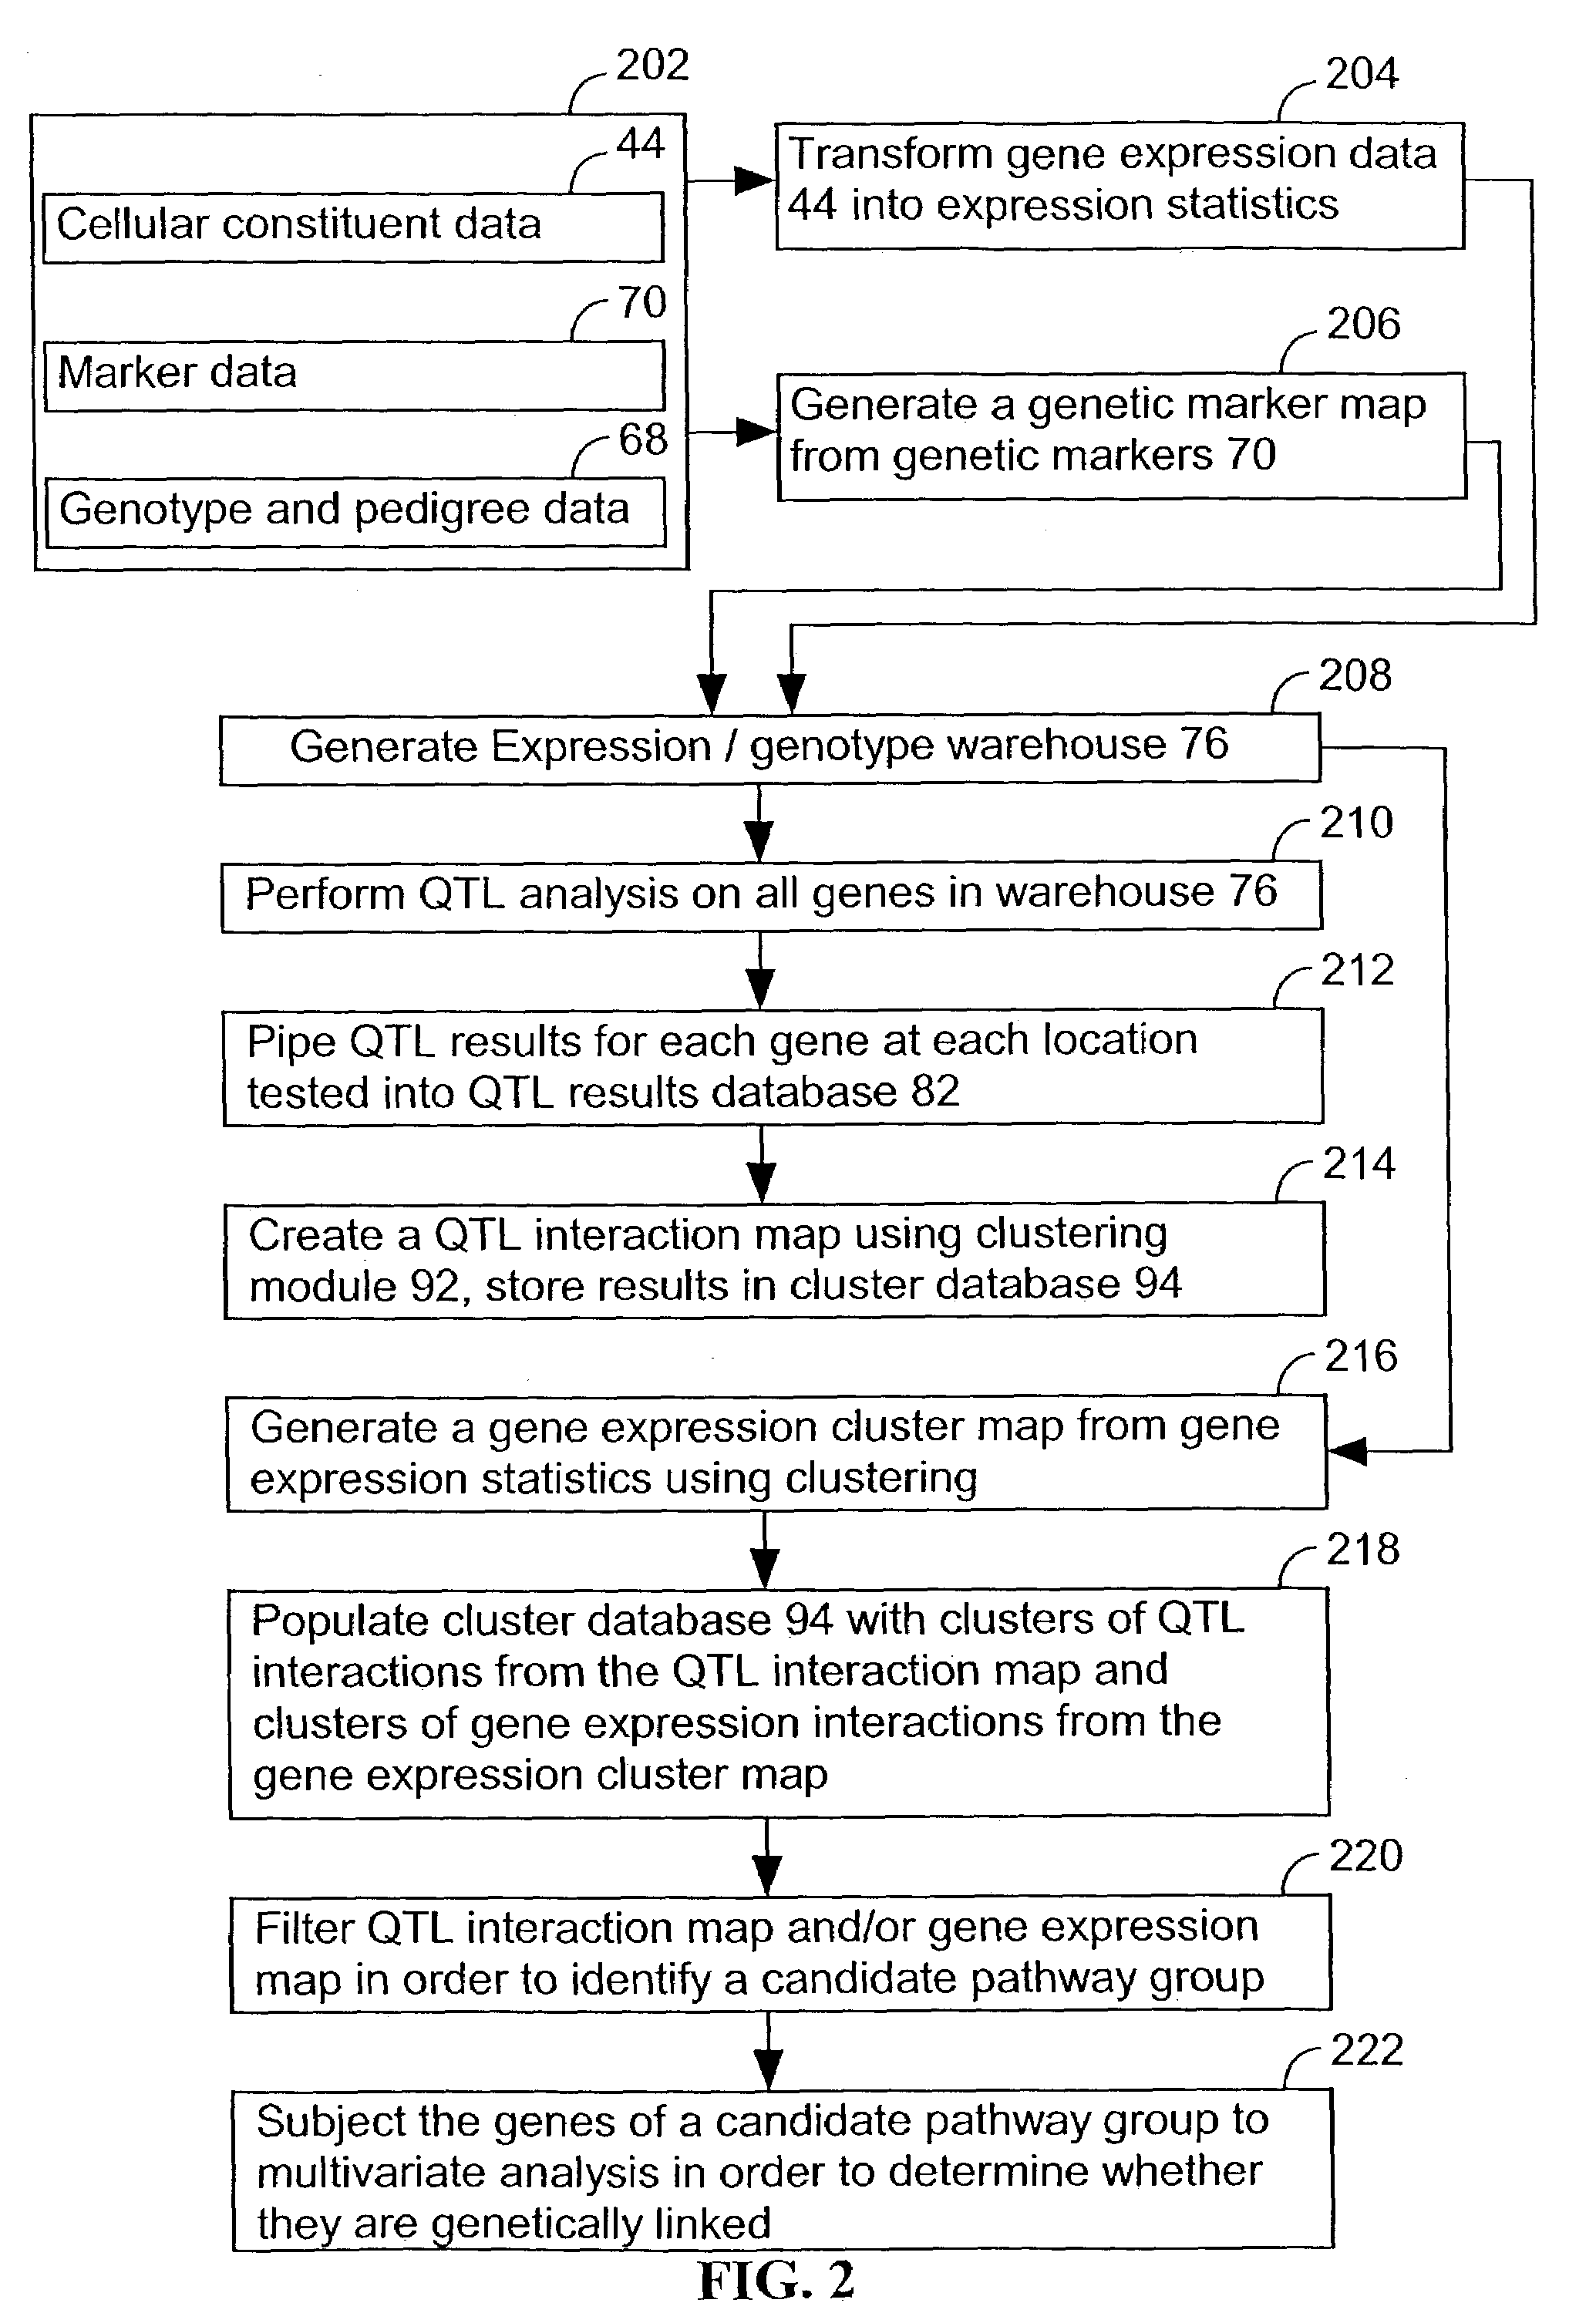 Computer systems and methods for identifying genes and determining pathways associated with traits